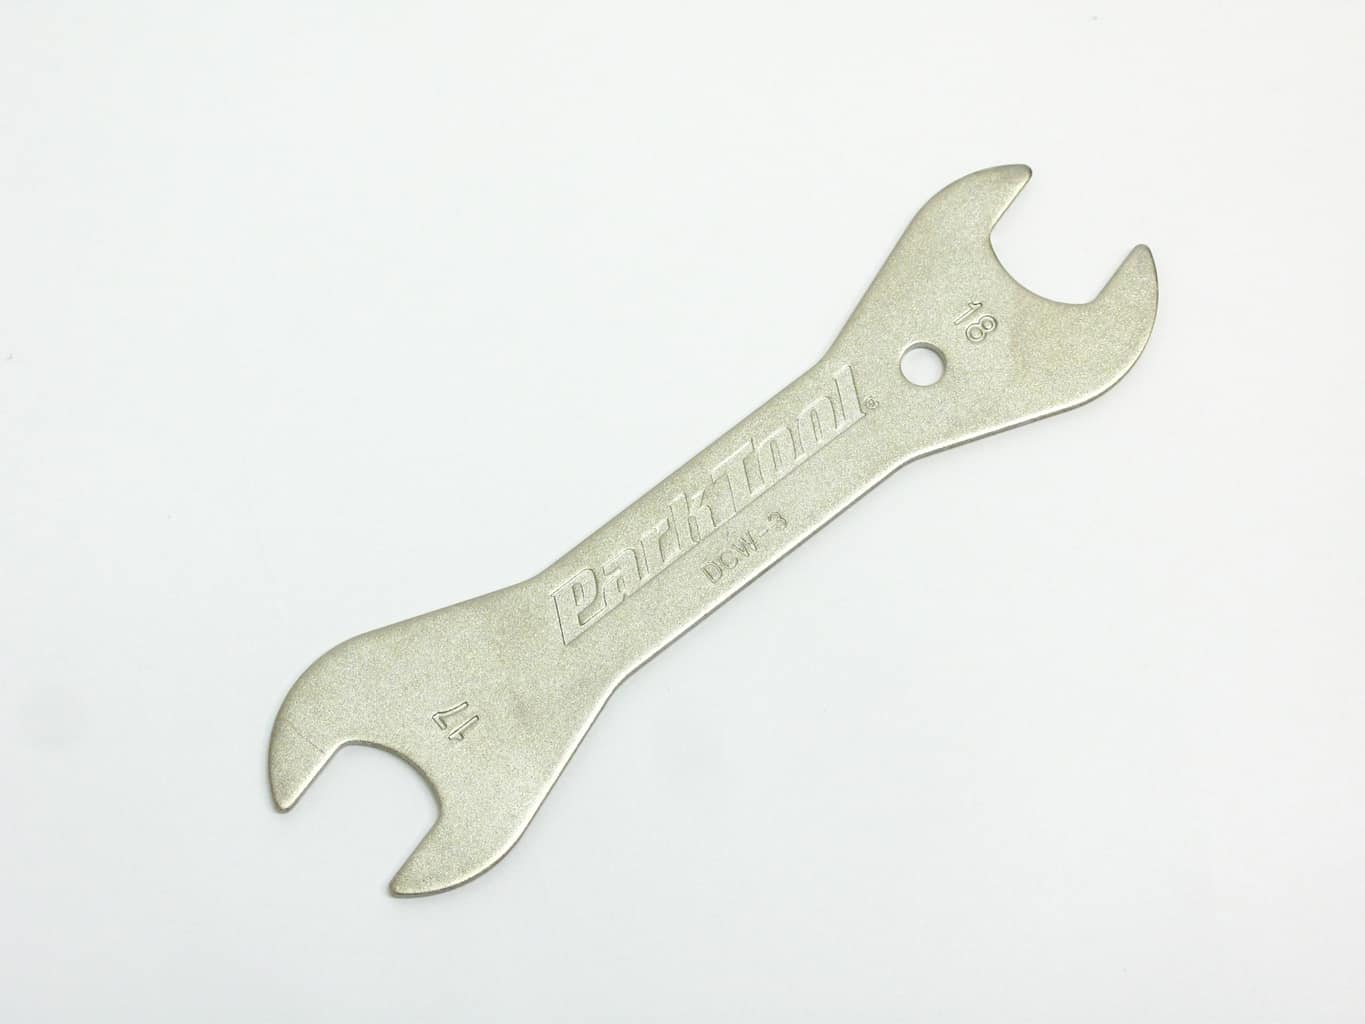 18mm cone wrench